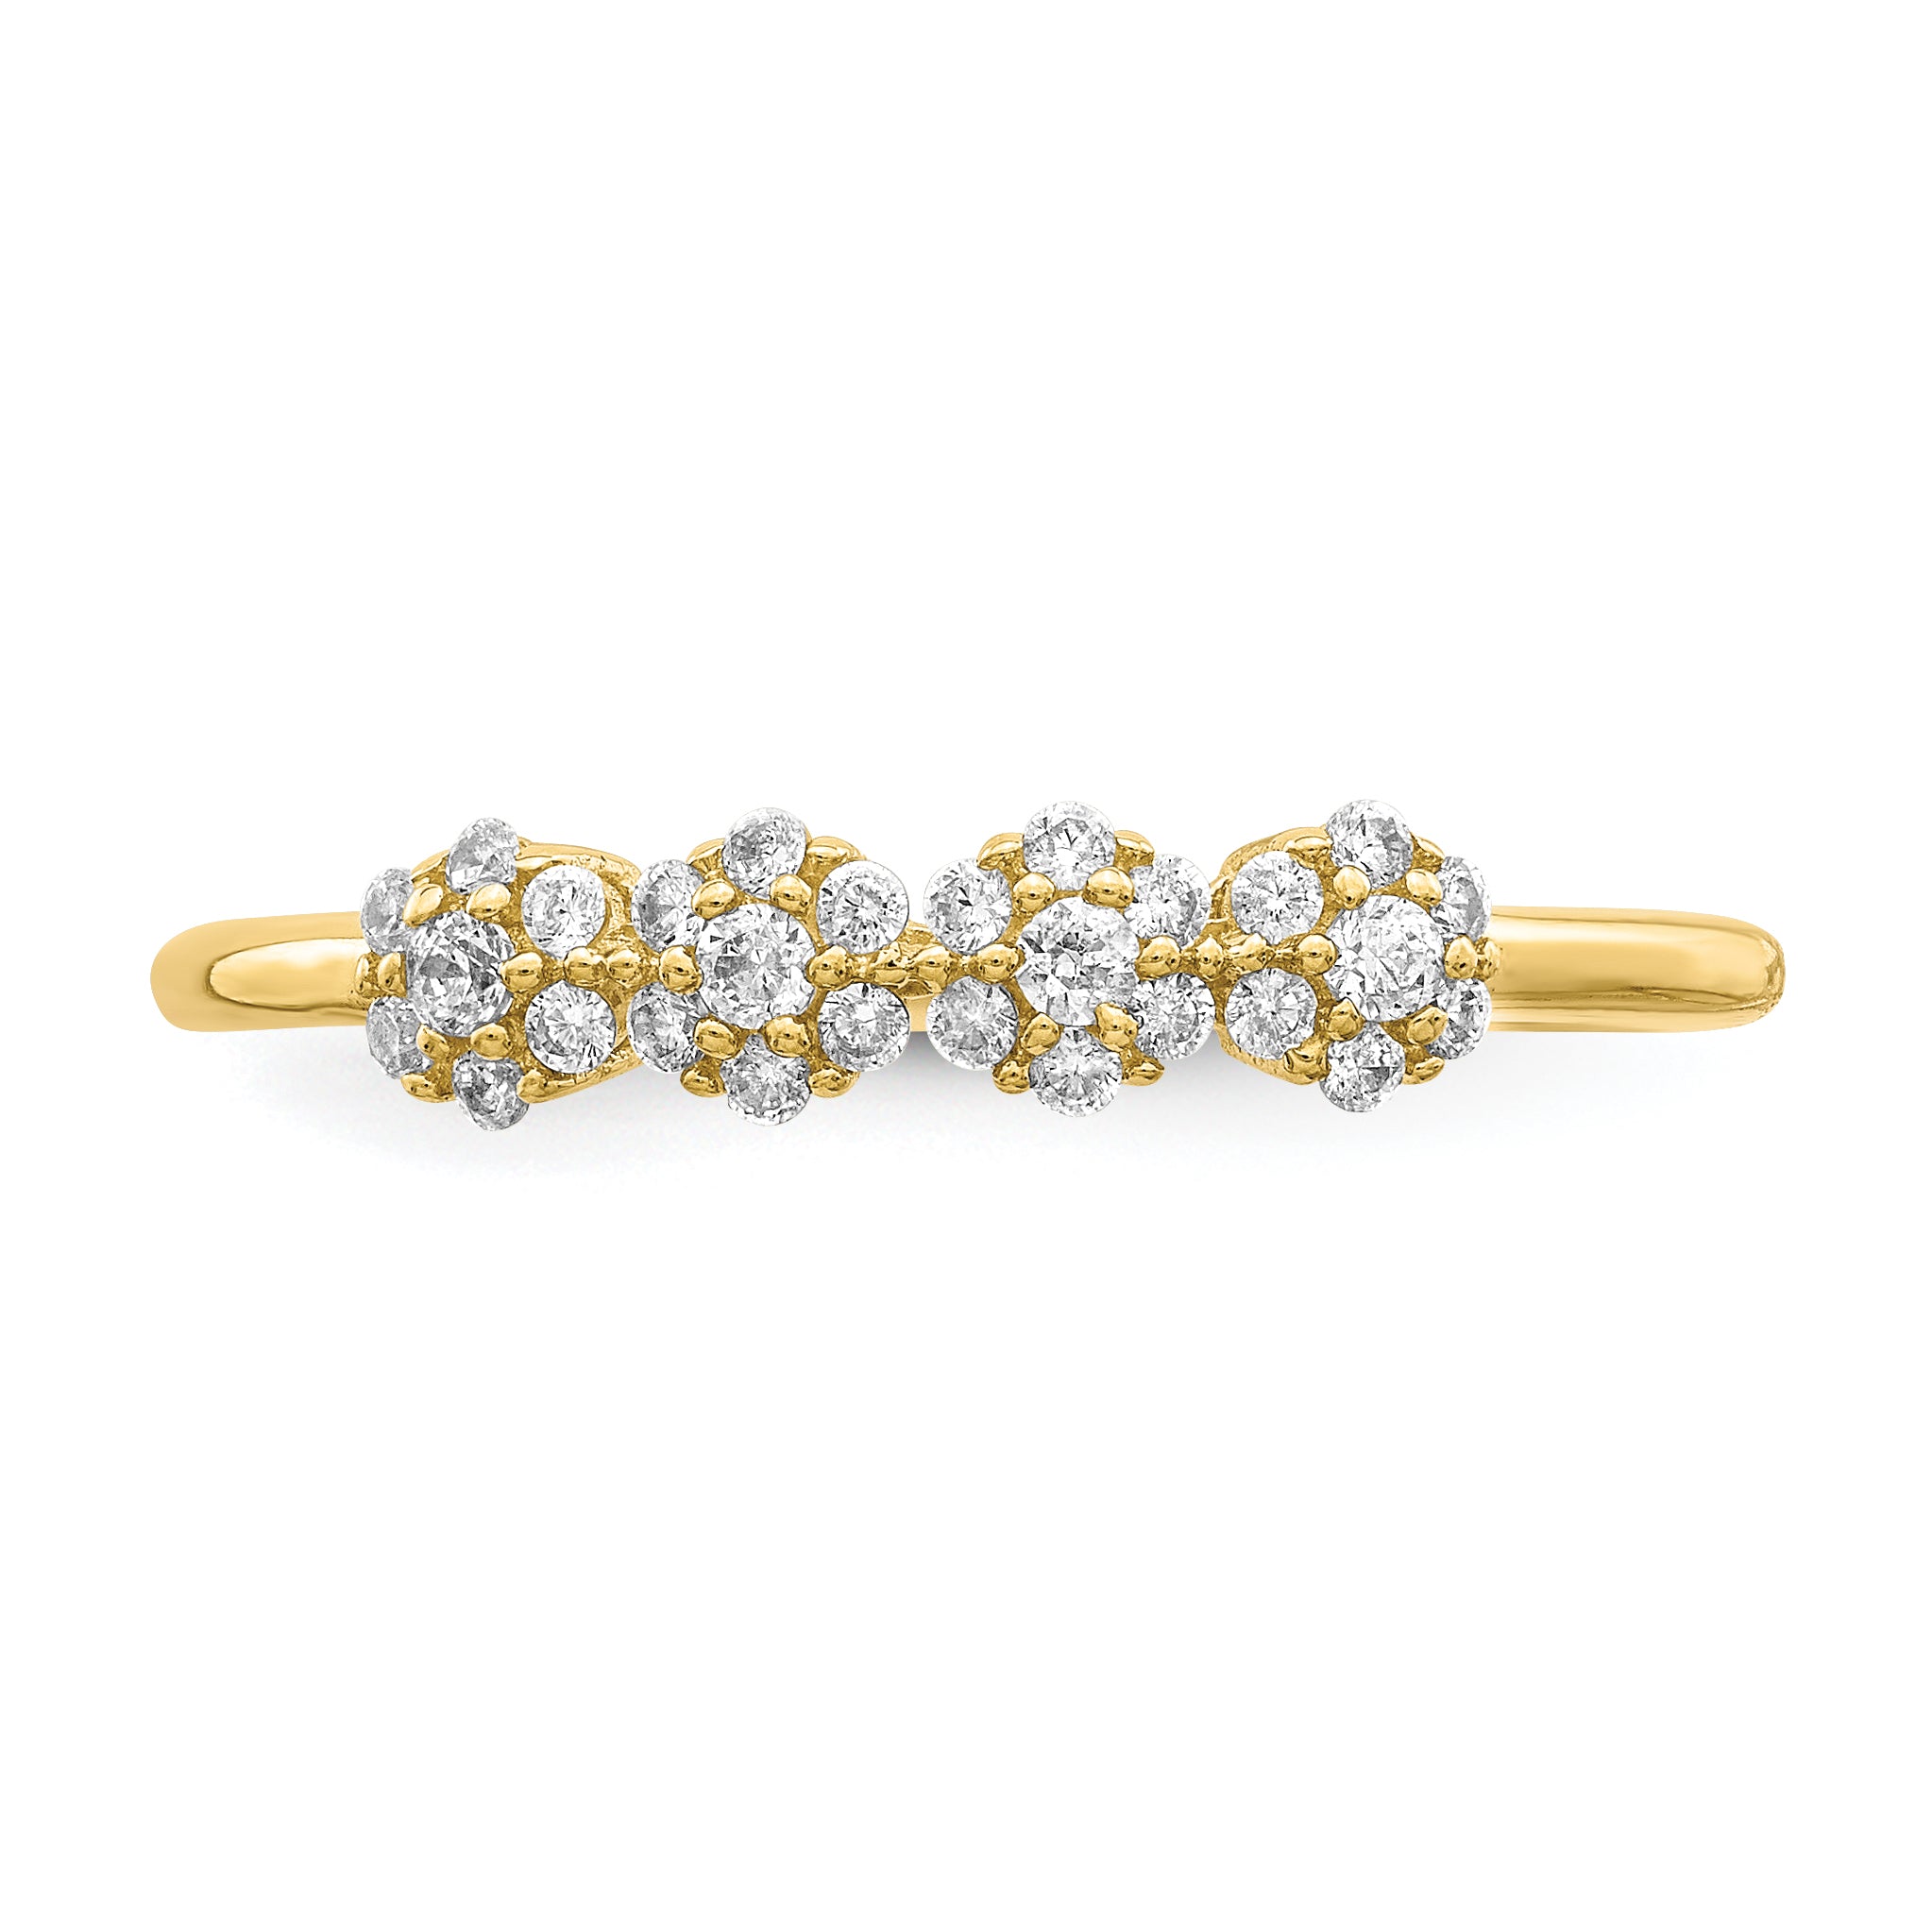 10K CZ Stackable Ring